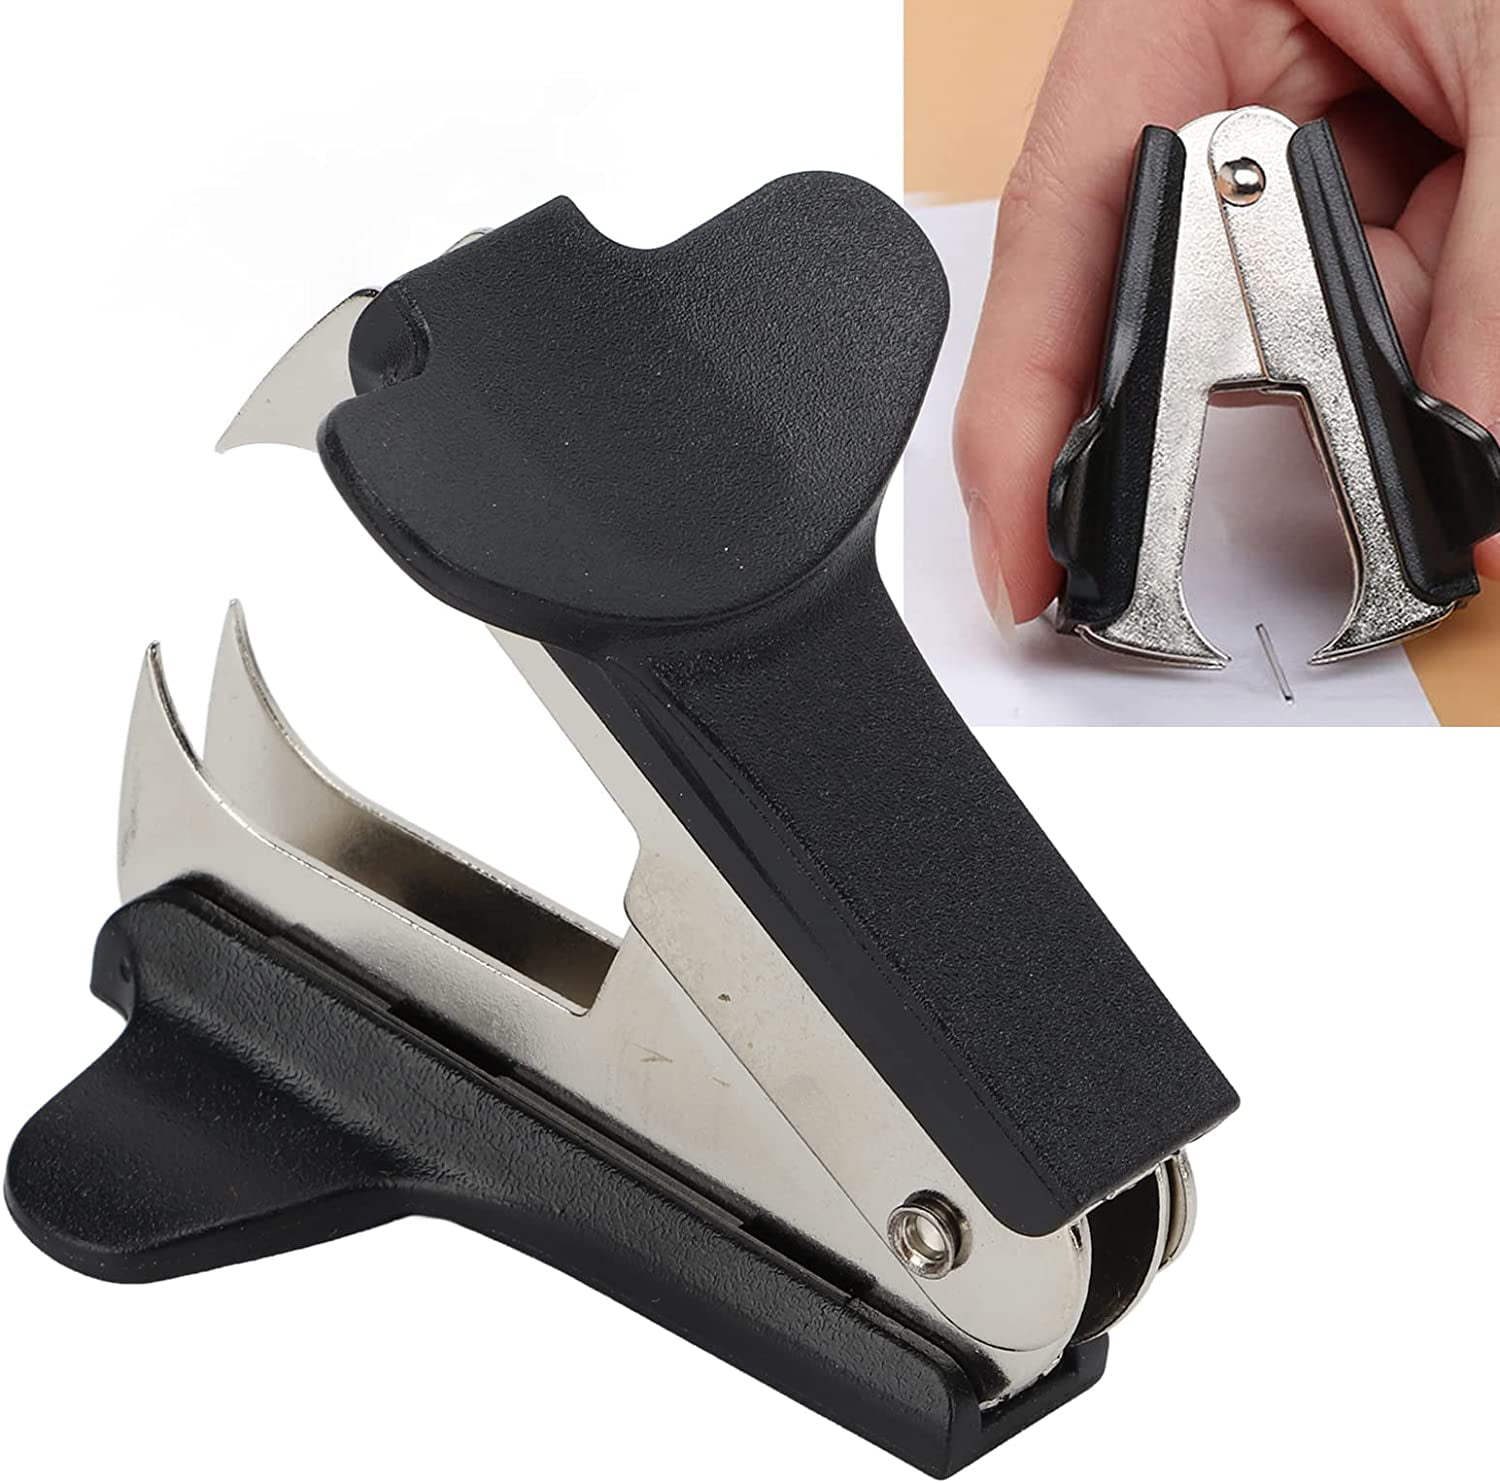 Staple Remover Portable Mini Black Staple Puller Pinch Jaw Style Staple  Remover Tool with Safety Lock Ergonomic Handle Handheld Needle Remover Nail  Remover Office Supplies 